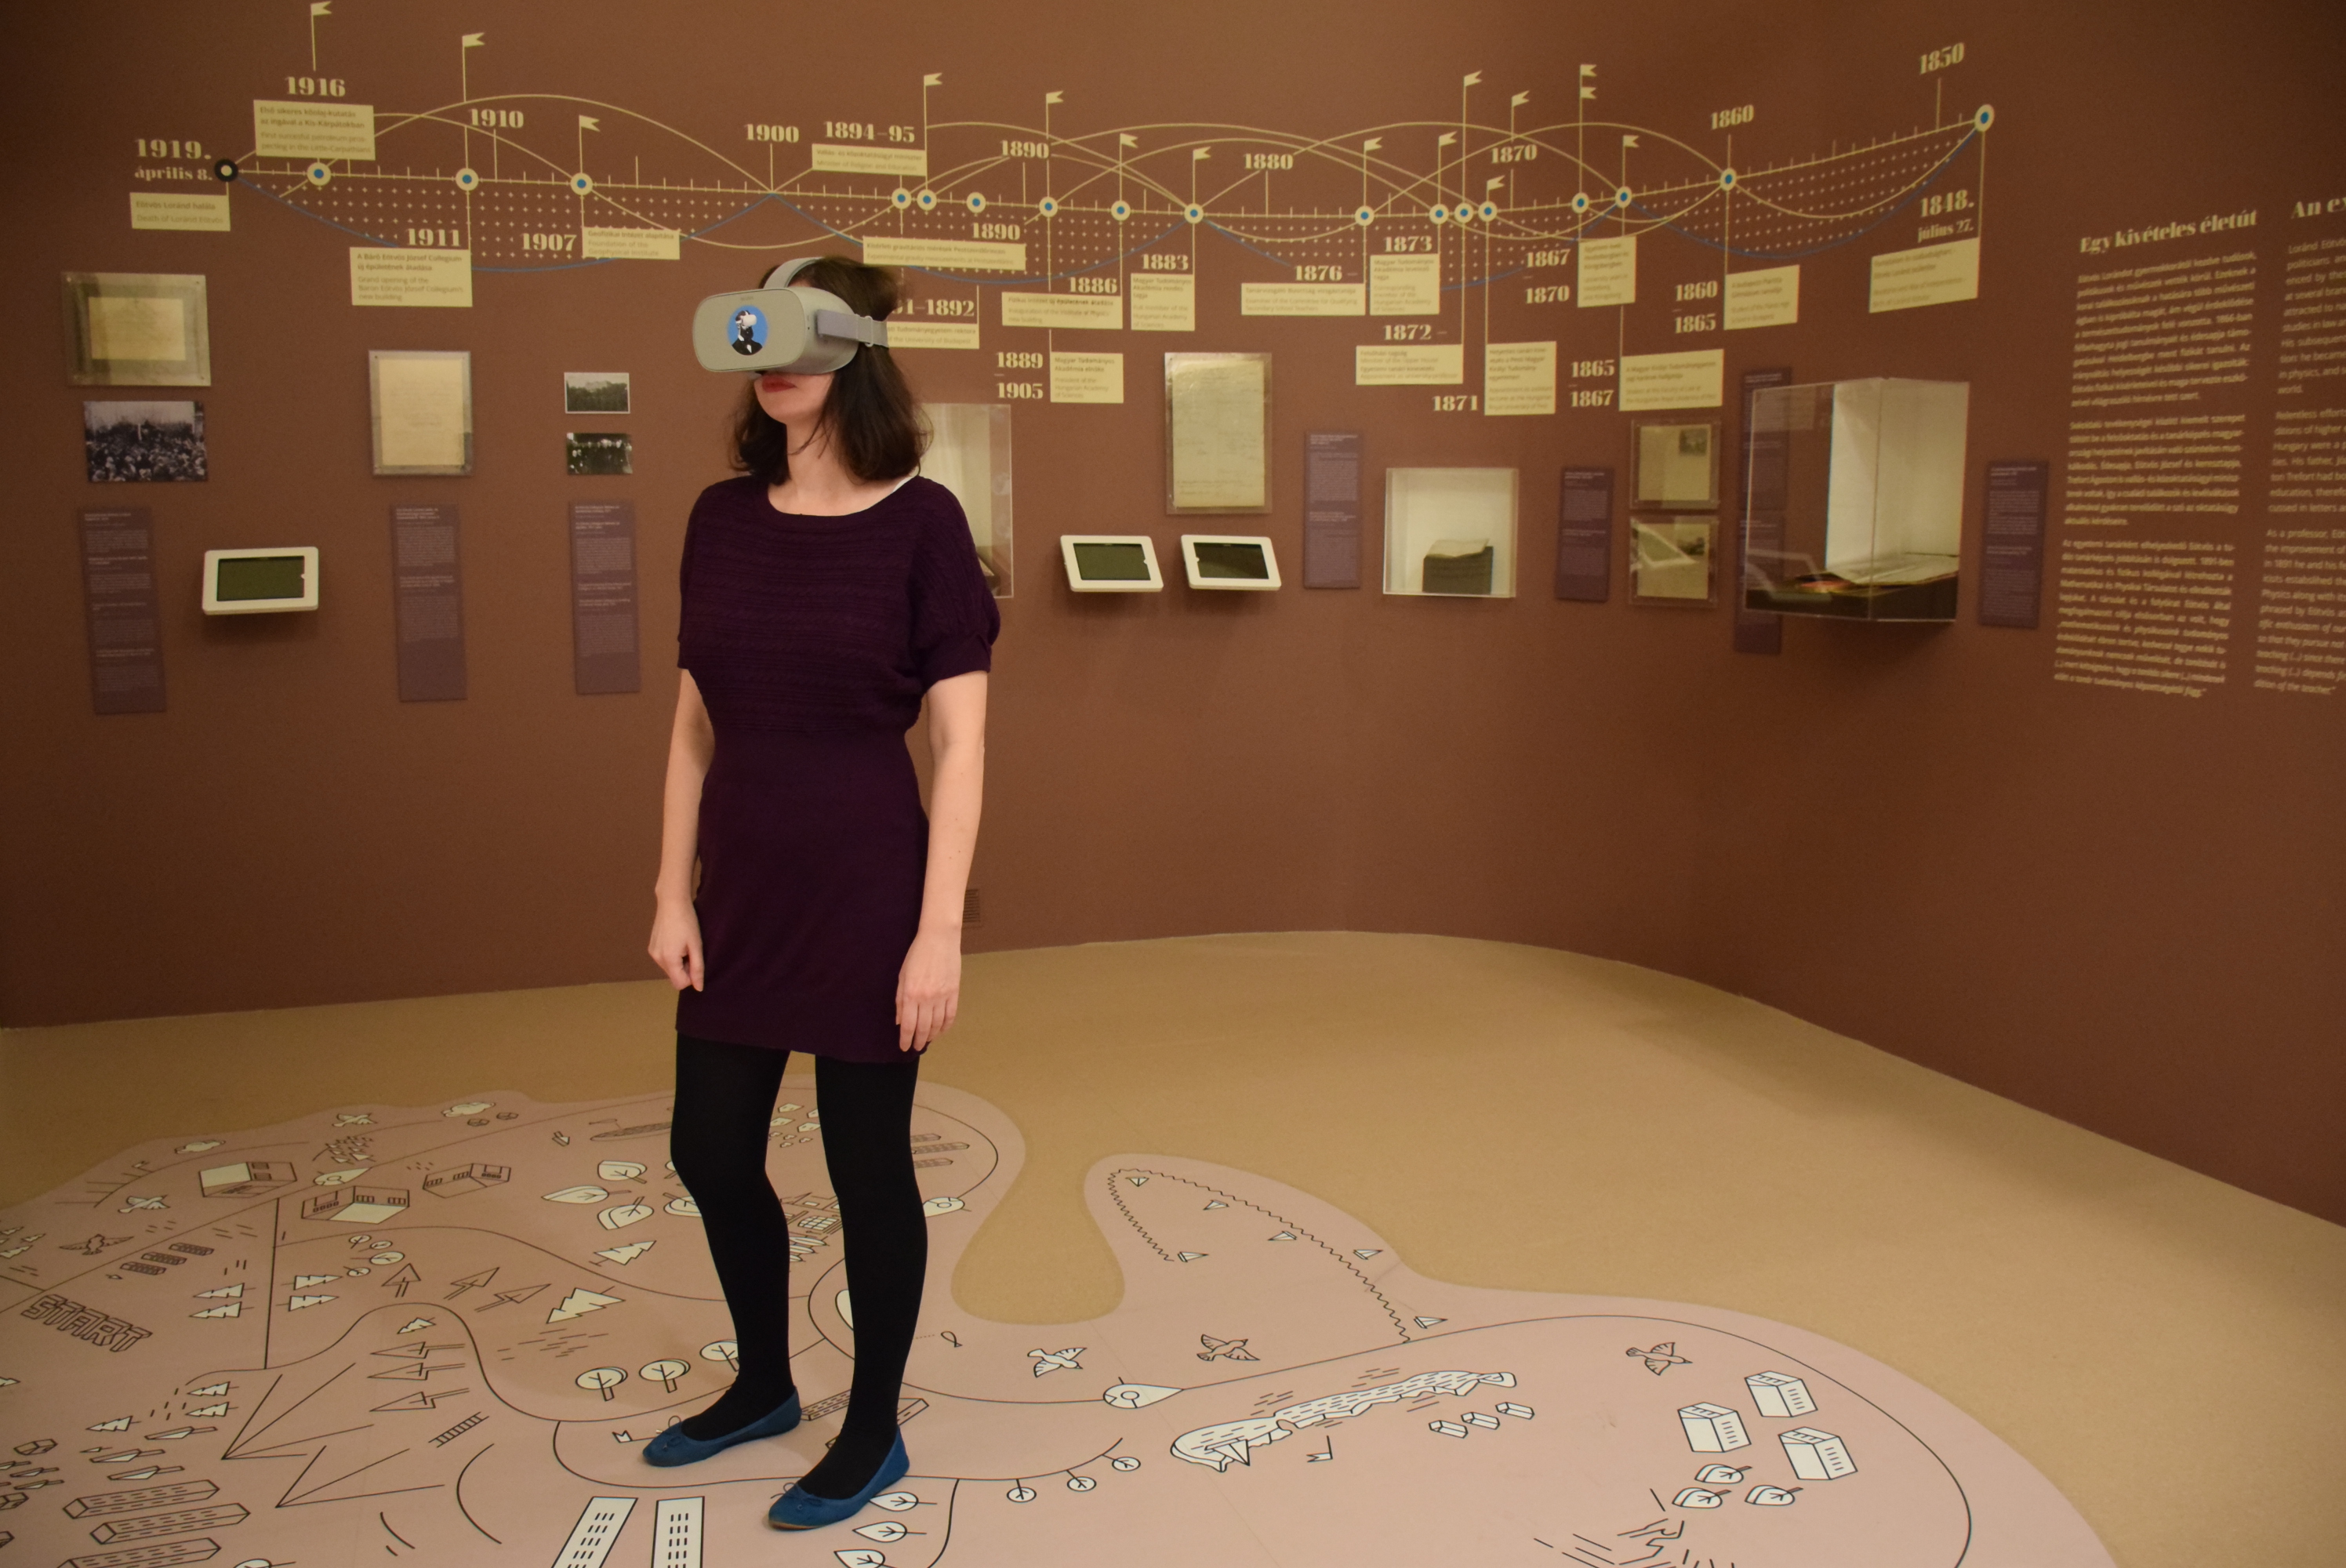 Virtual Reality glasses can be used at Eötvös Exhibition